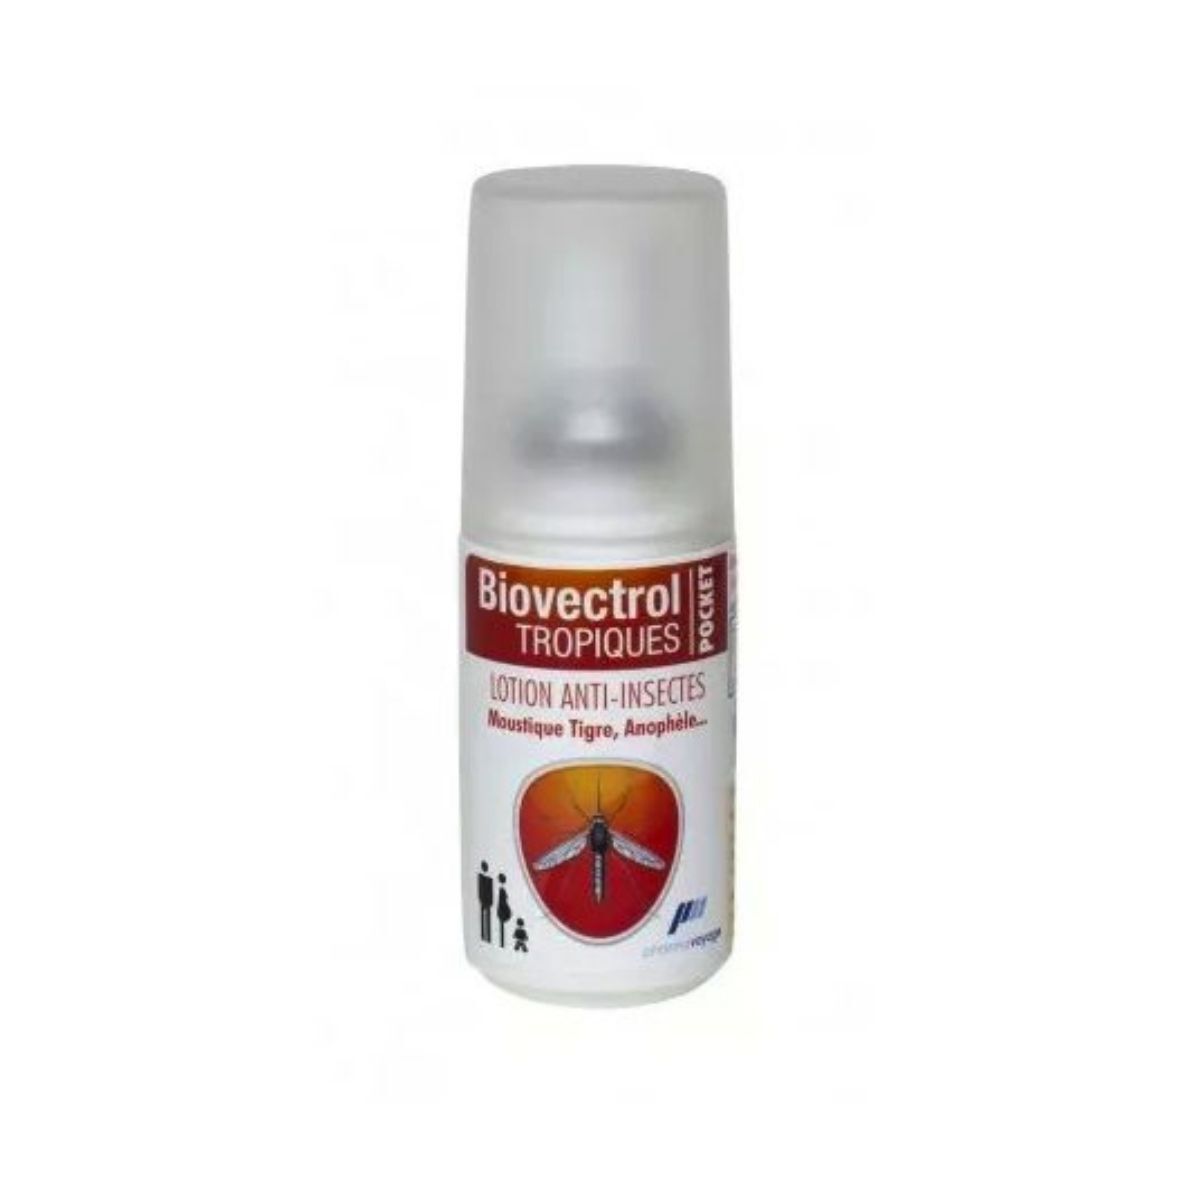 Pharmavoyage Biovectrol Pocket Tropiques - Insect repellent